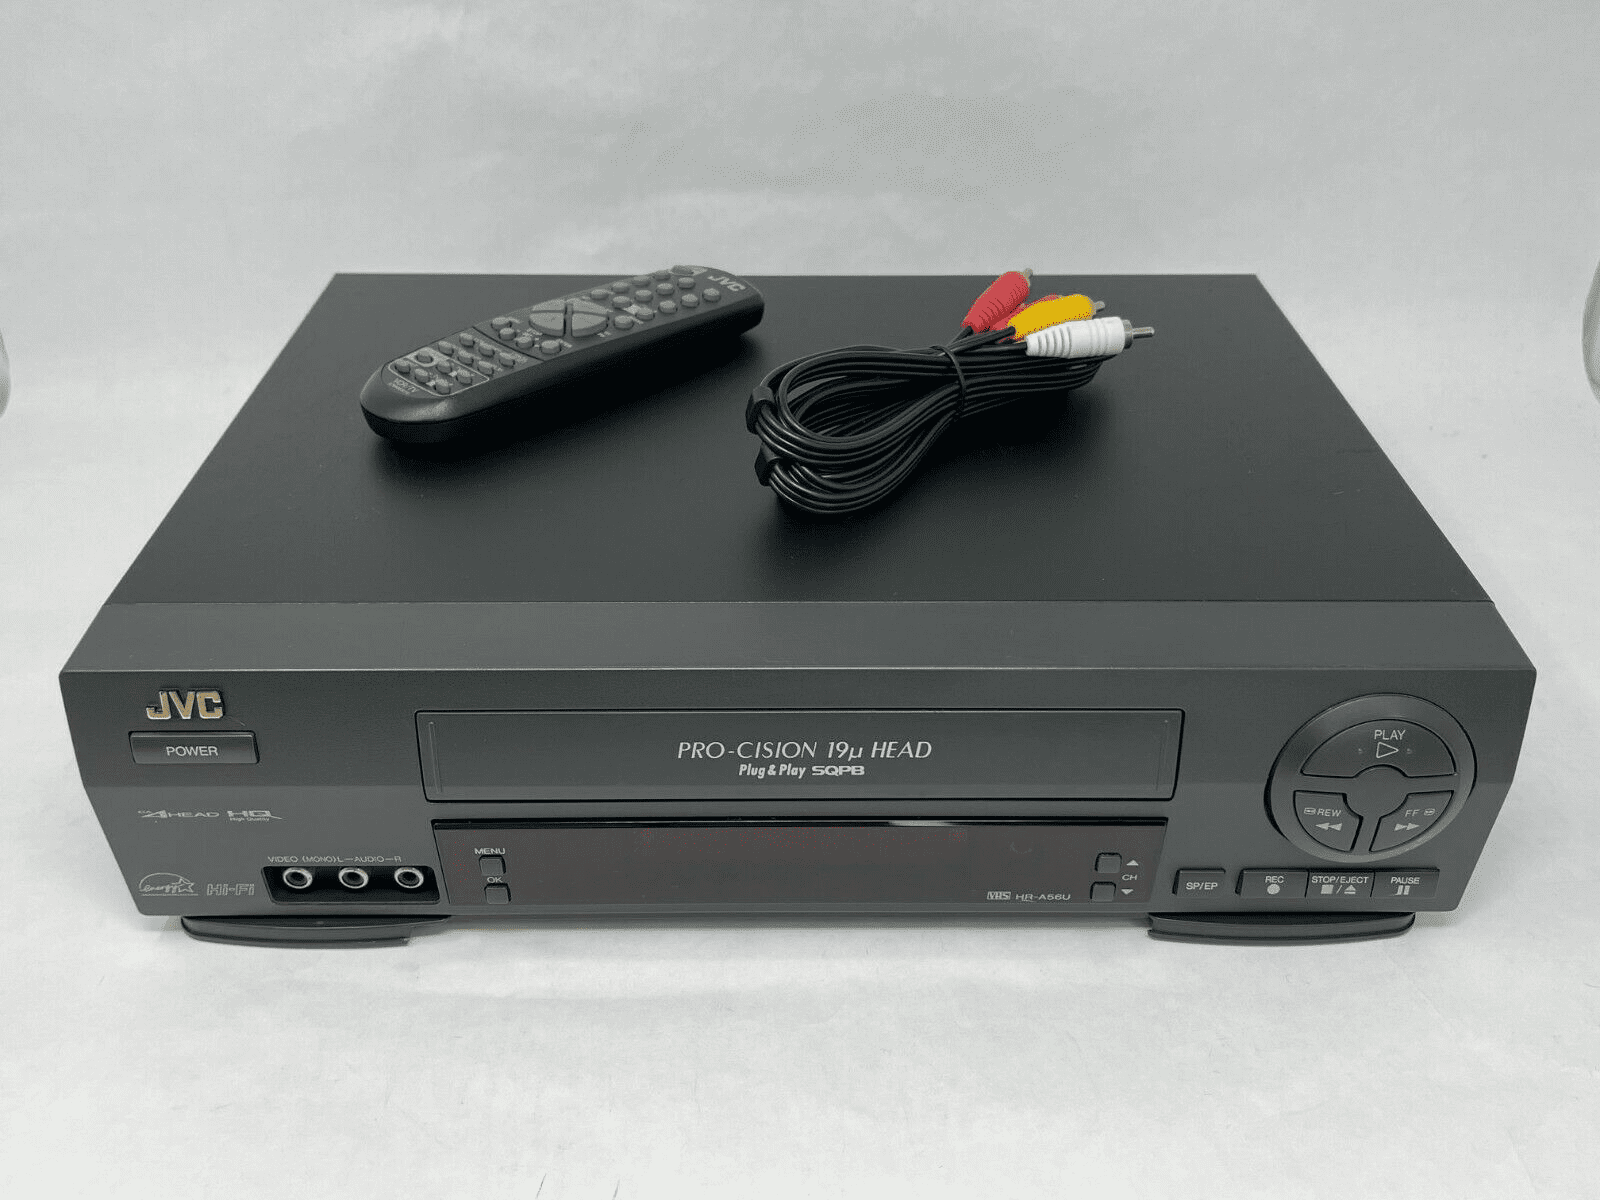 VHS/VCR Players for sale in Drummondville, Quebec